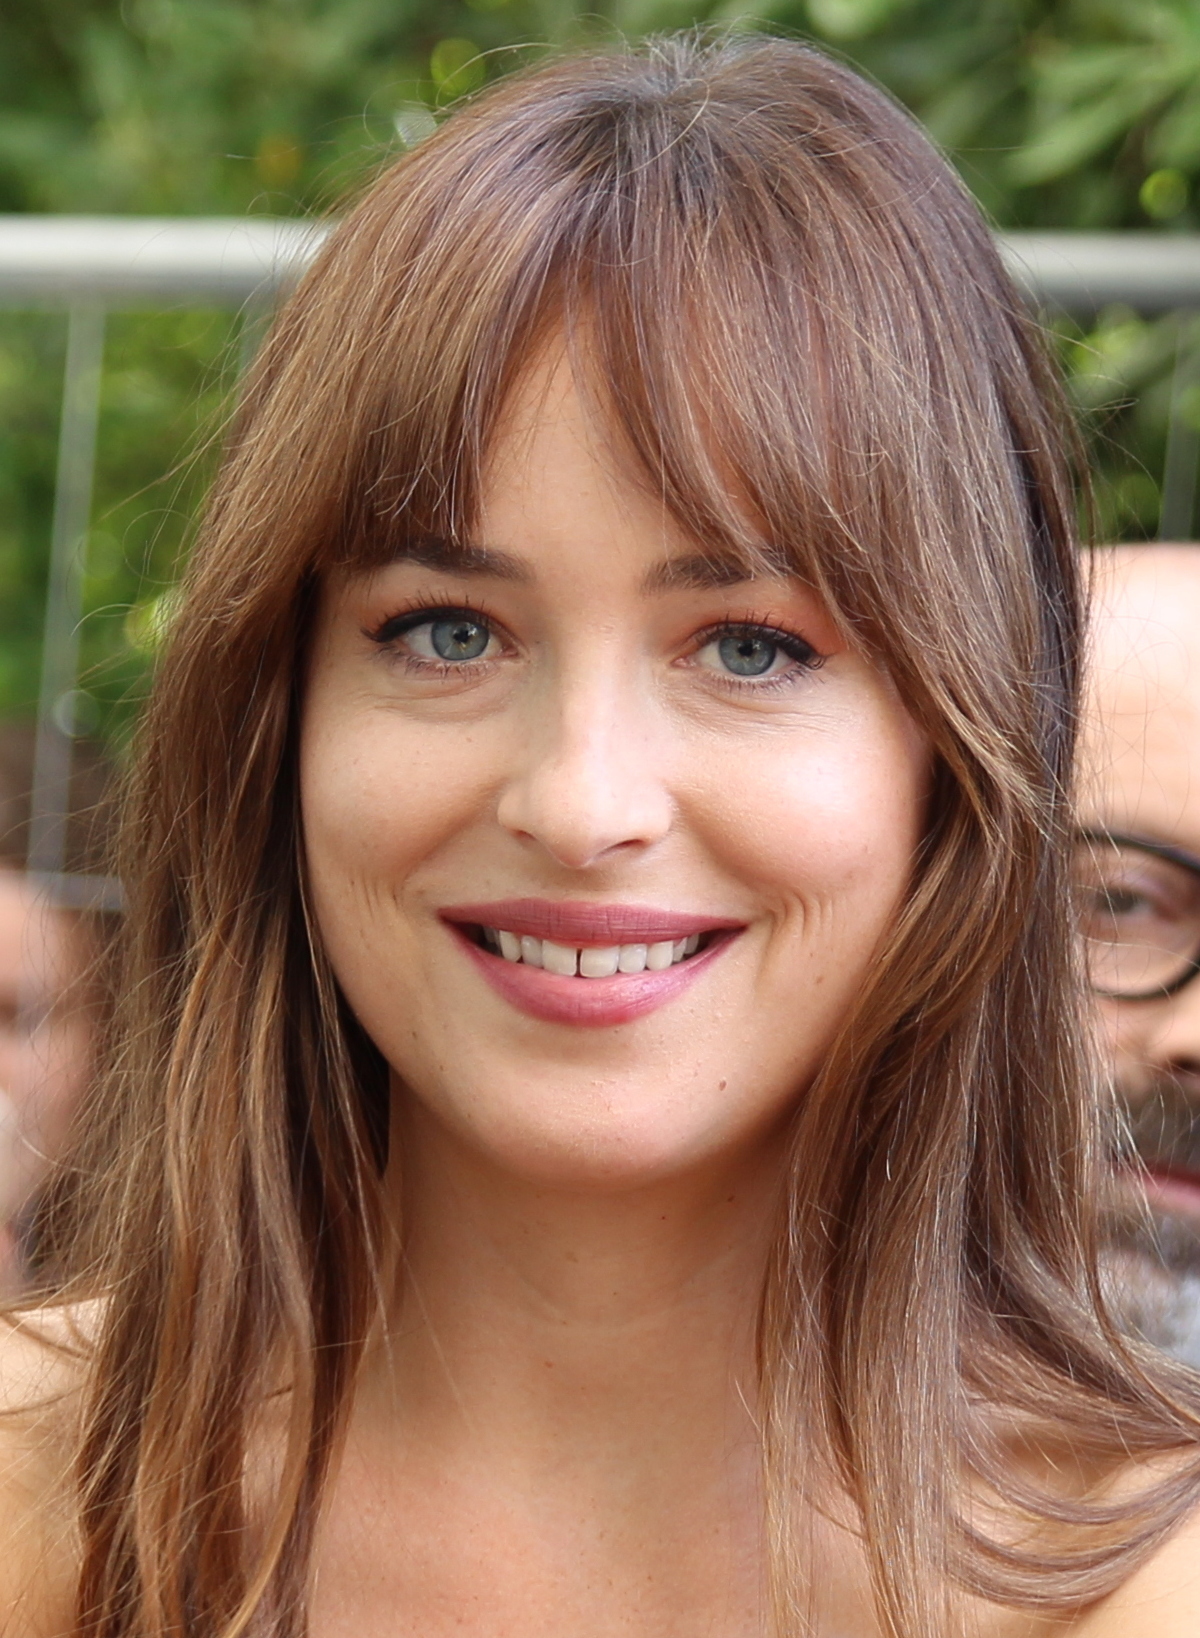 fifty-shades-of-grey’s-dakota-johnson-says-she-can’t-function-unless-she-gets-10-hours-of-sleep